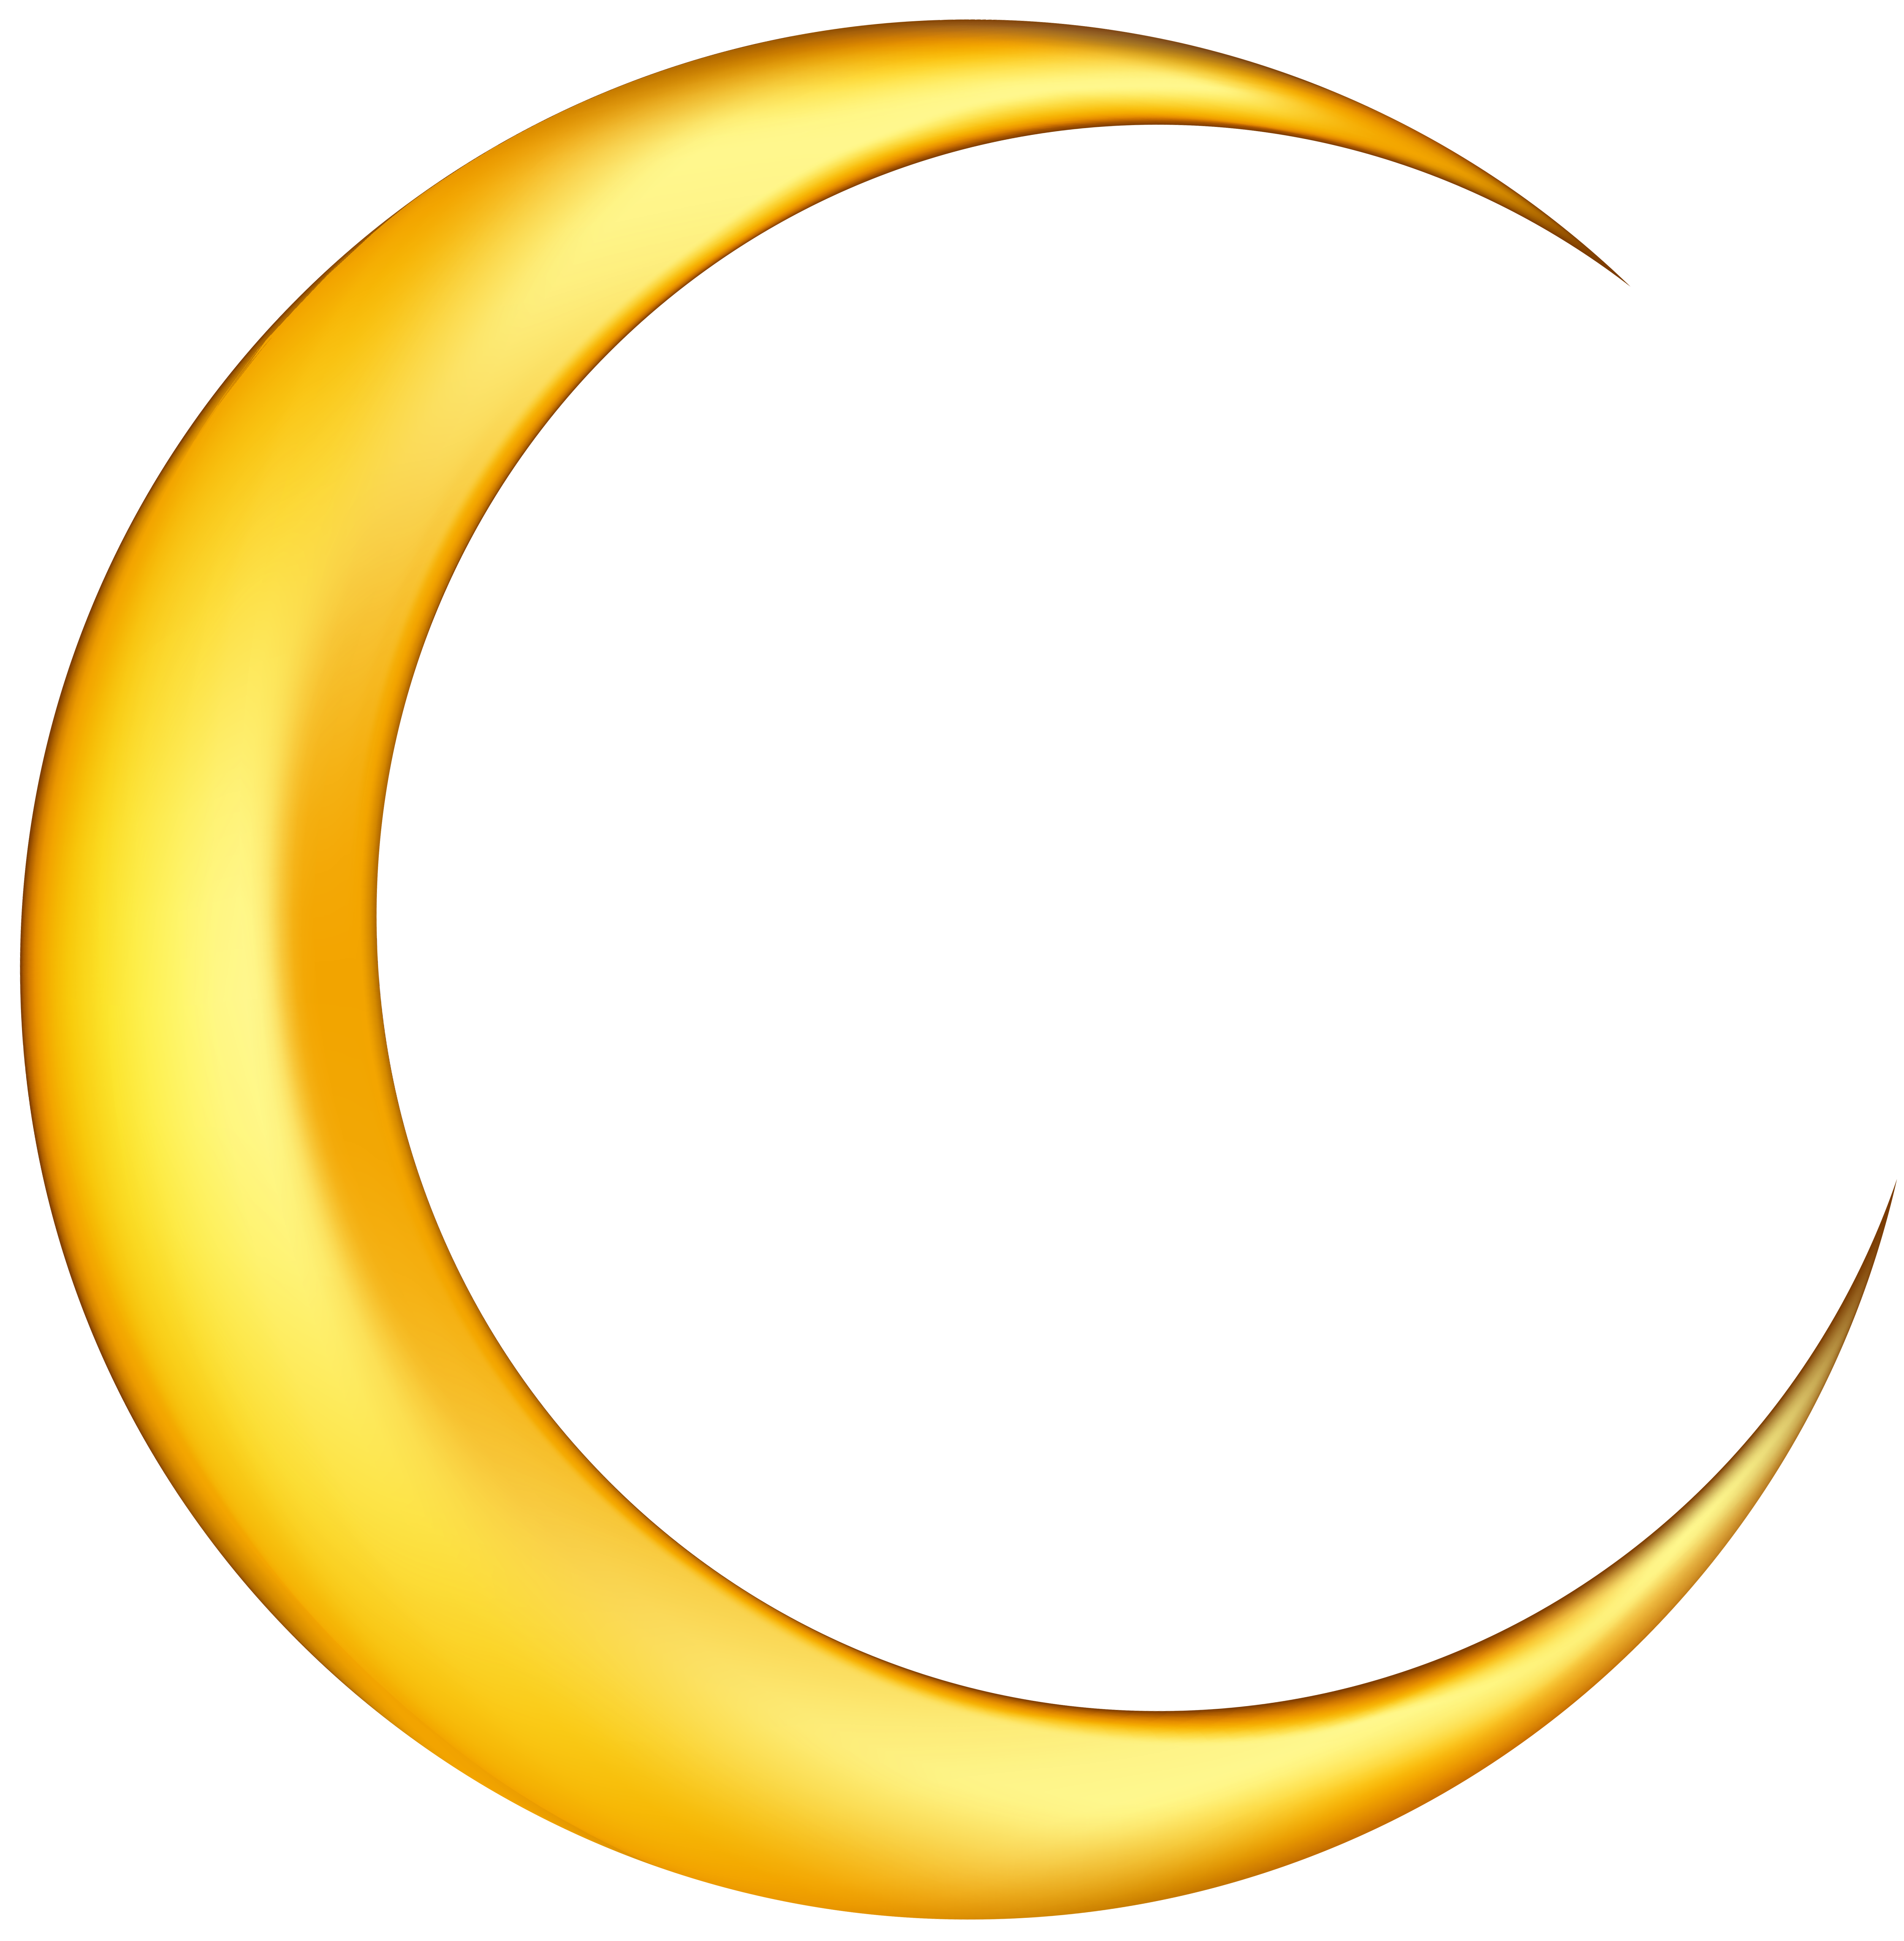 moon clipart png - photo #20